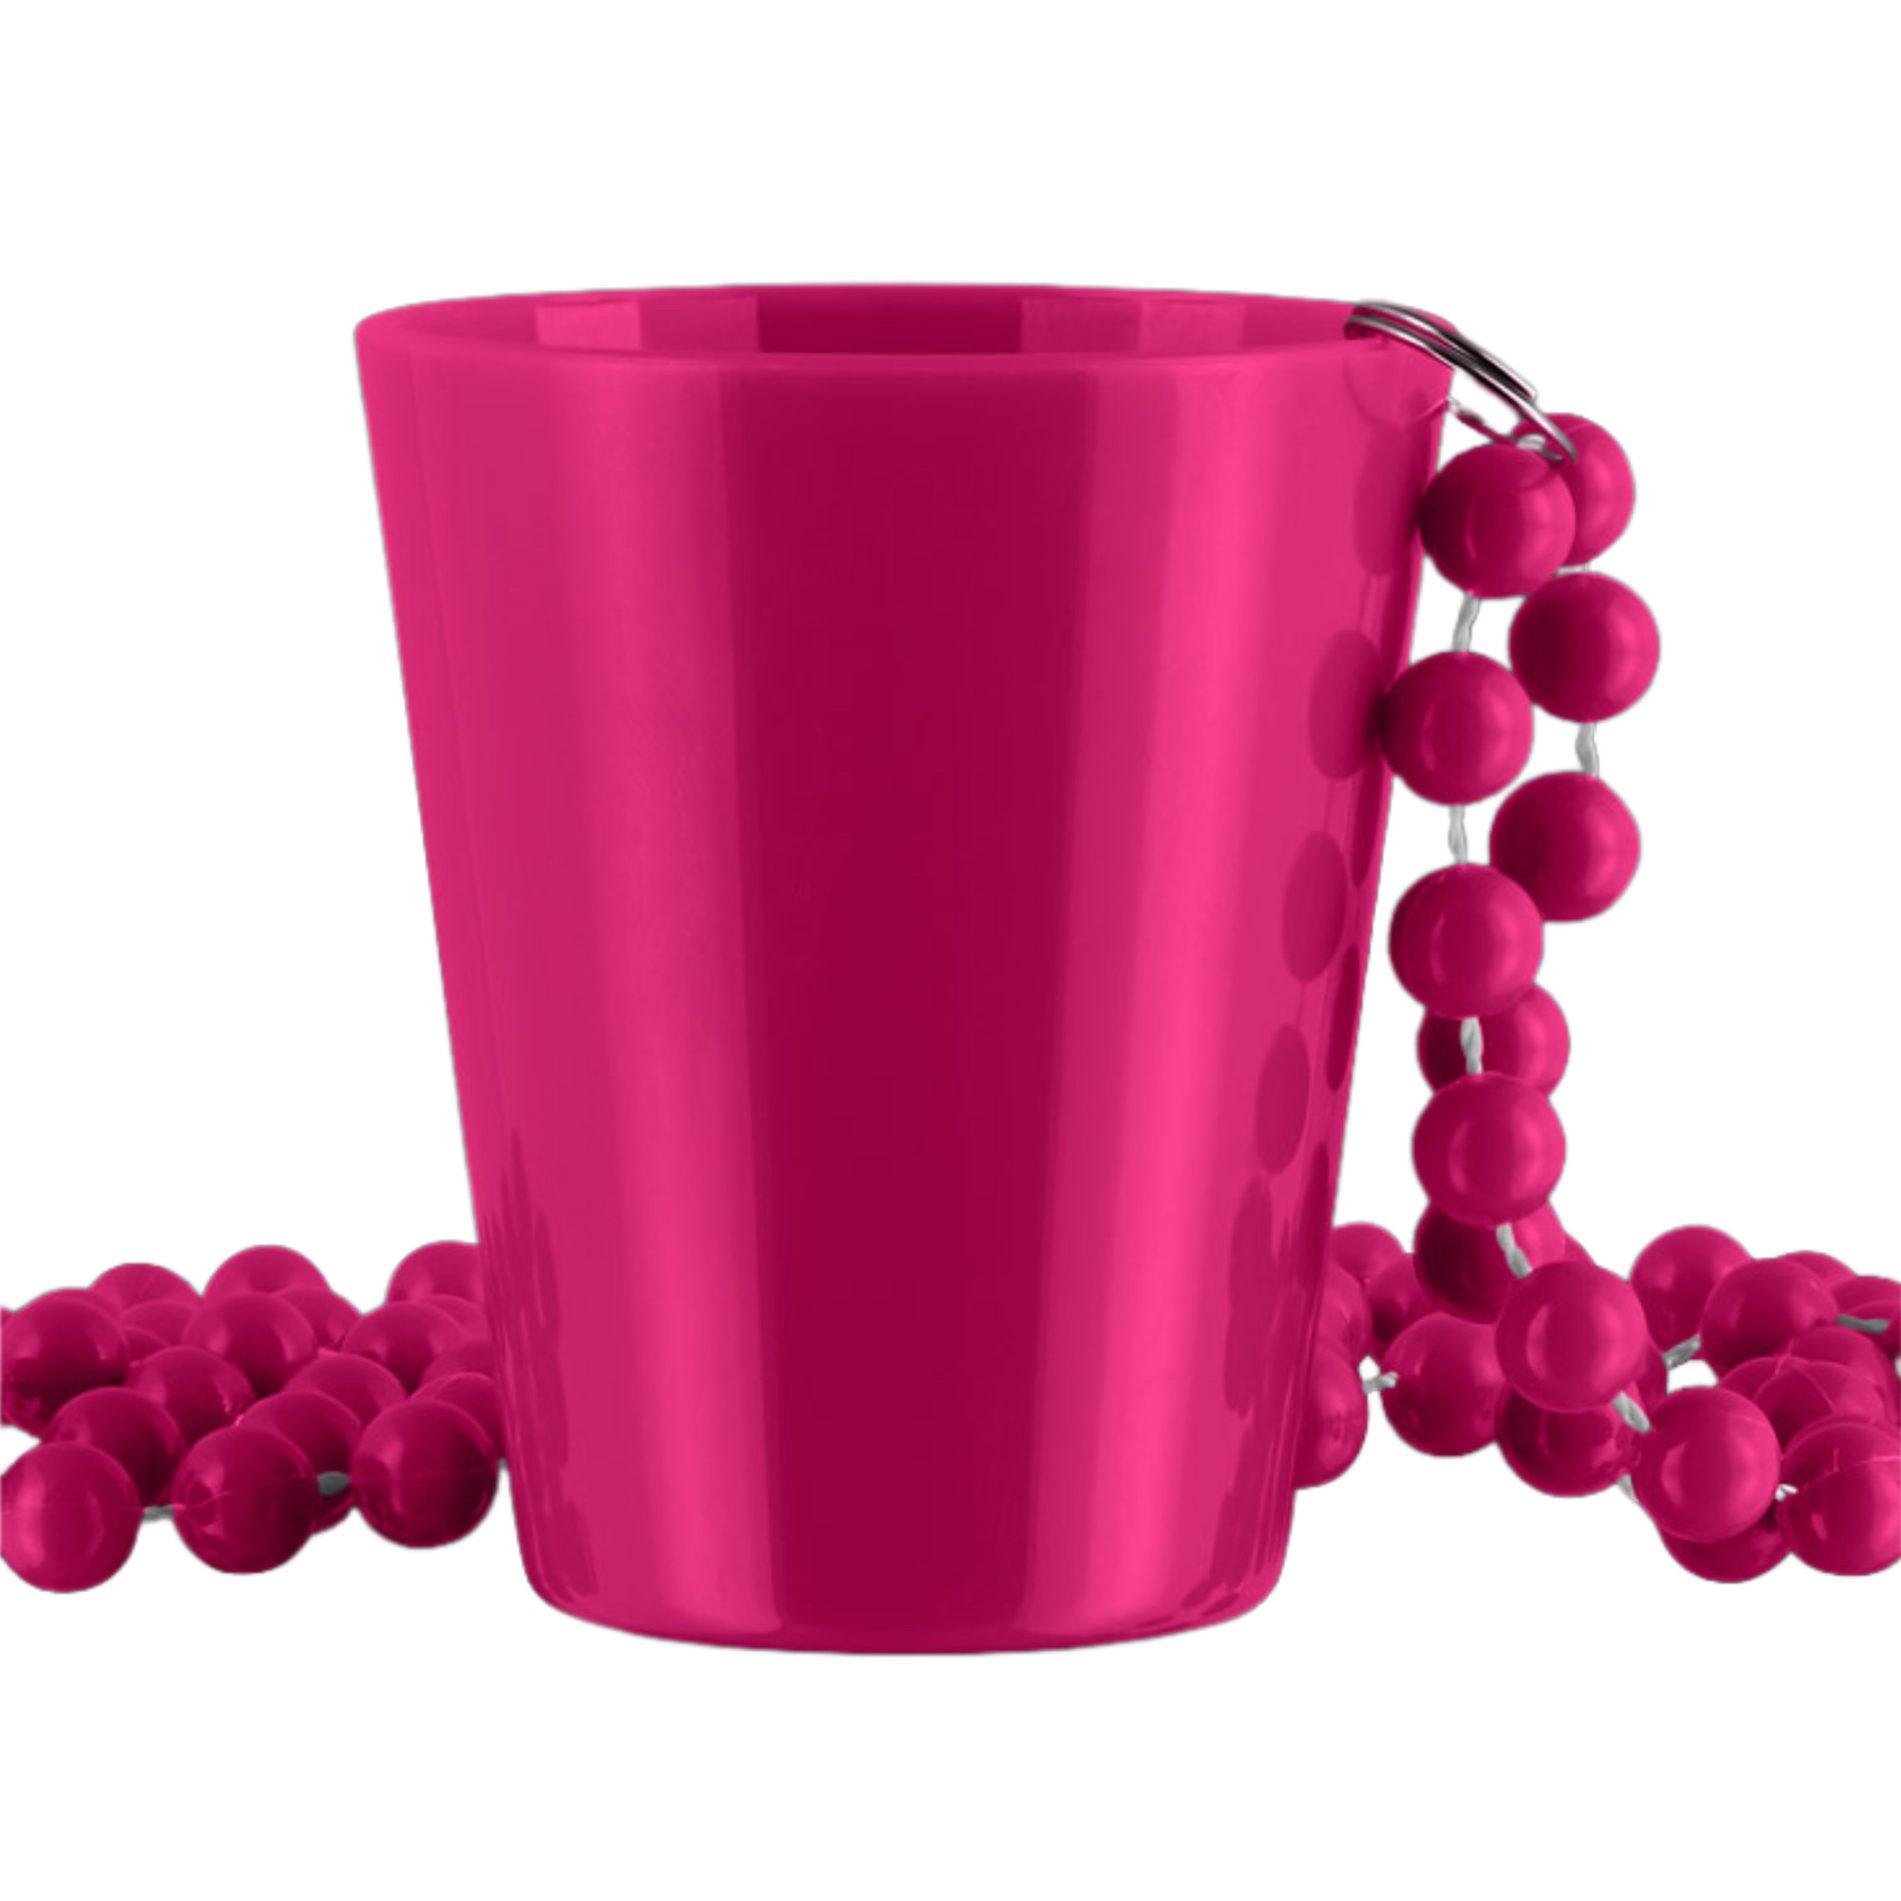 Unlit Pink Shot Glass on Pink Beaded Necklaces All Products 3